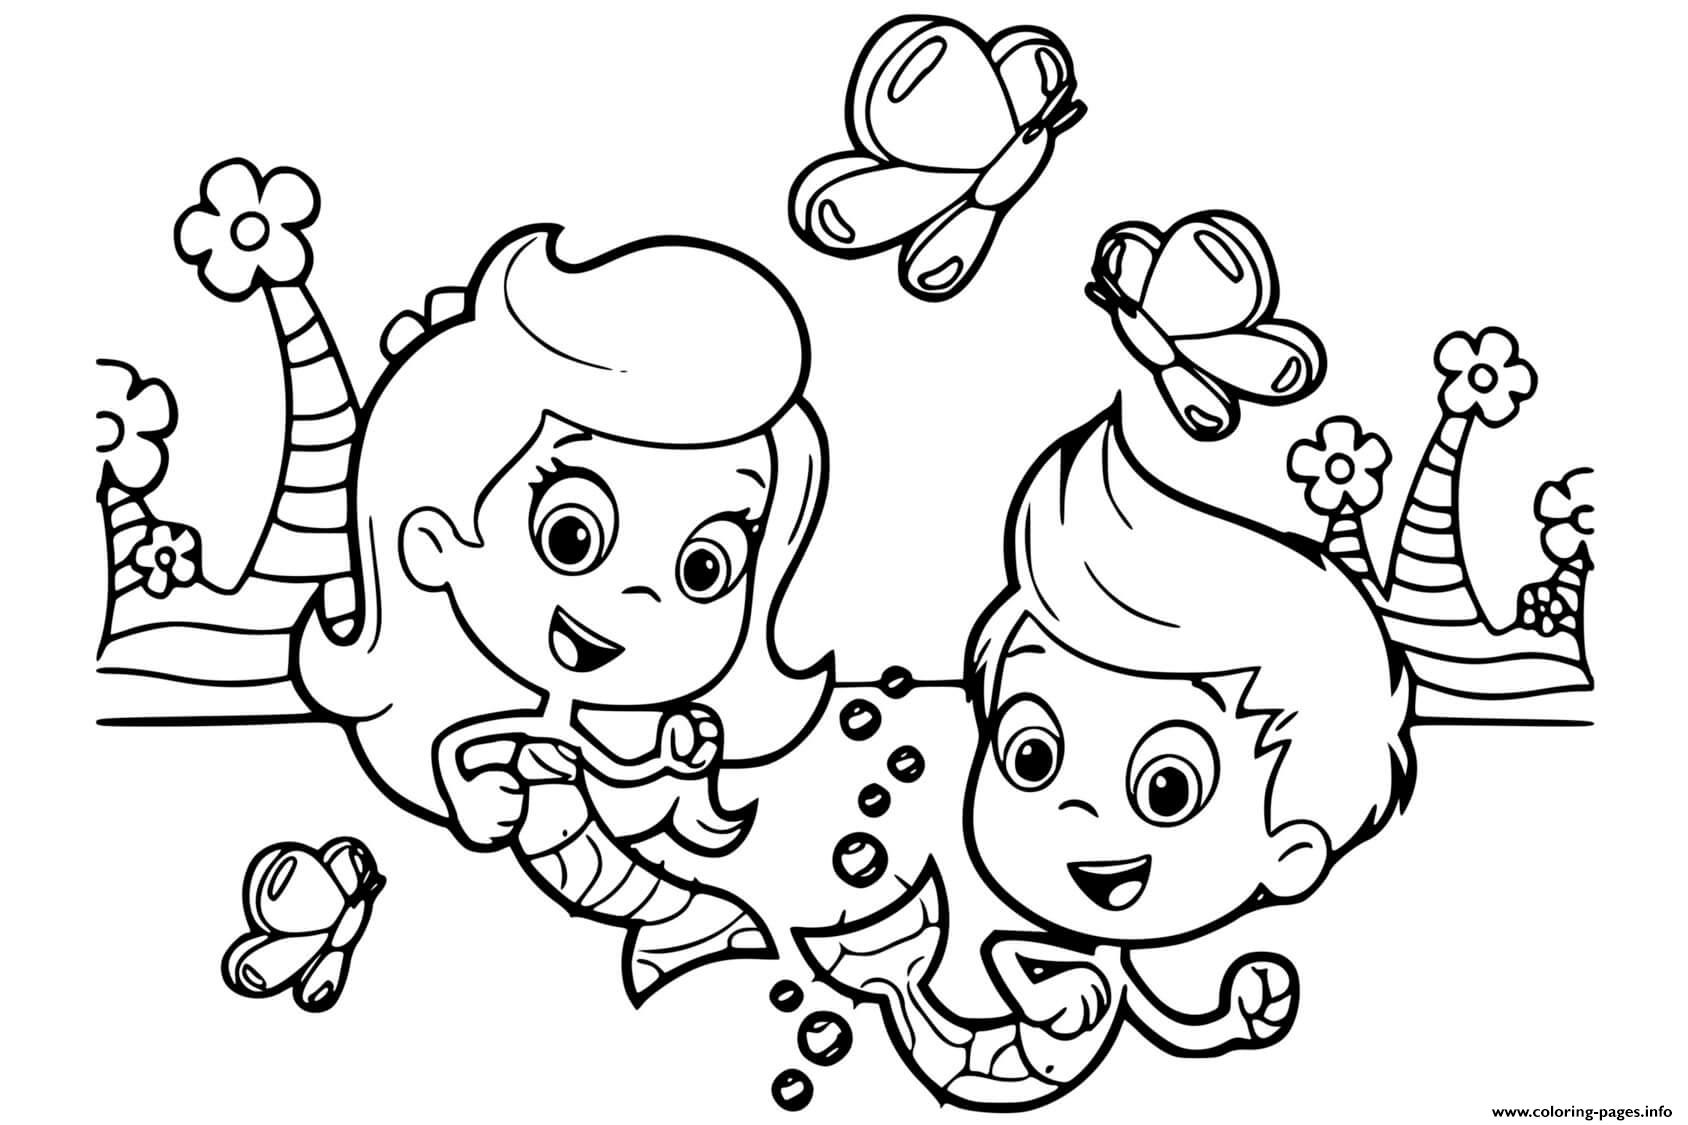 Gil Molly Bubble Guppies coloring pages